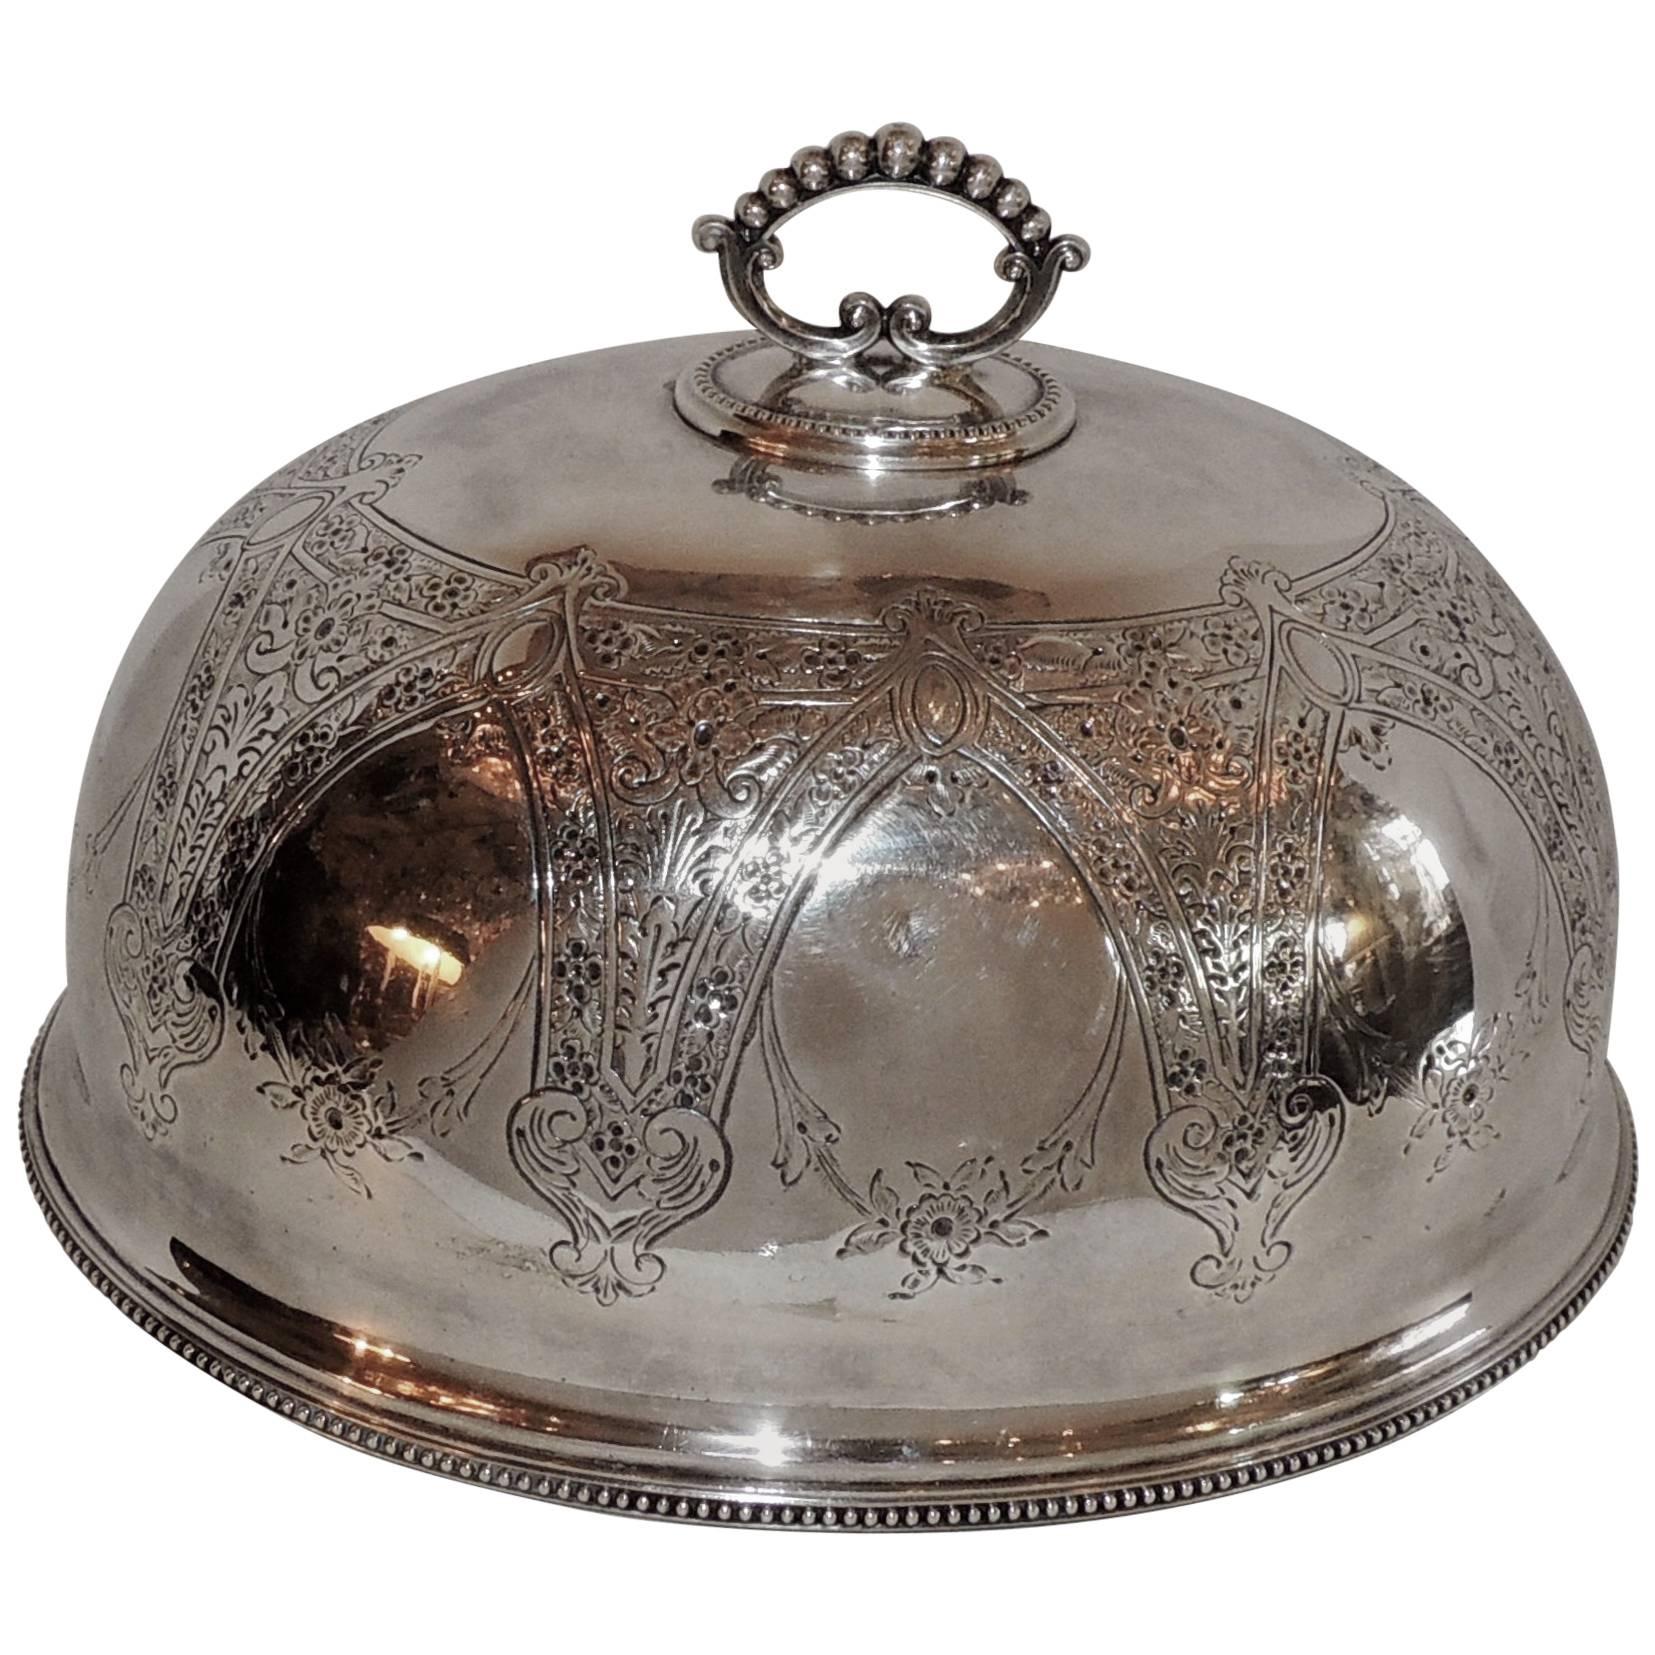 Antique Silver Plated Meat Food Turkey Dome Cover Victorian Cloche Large Serving